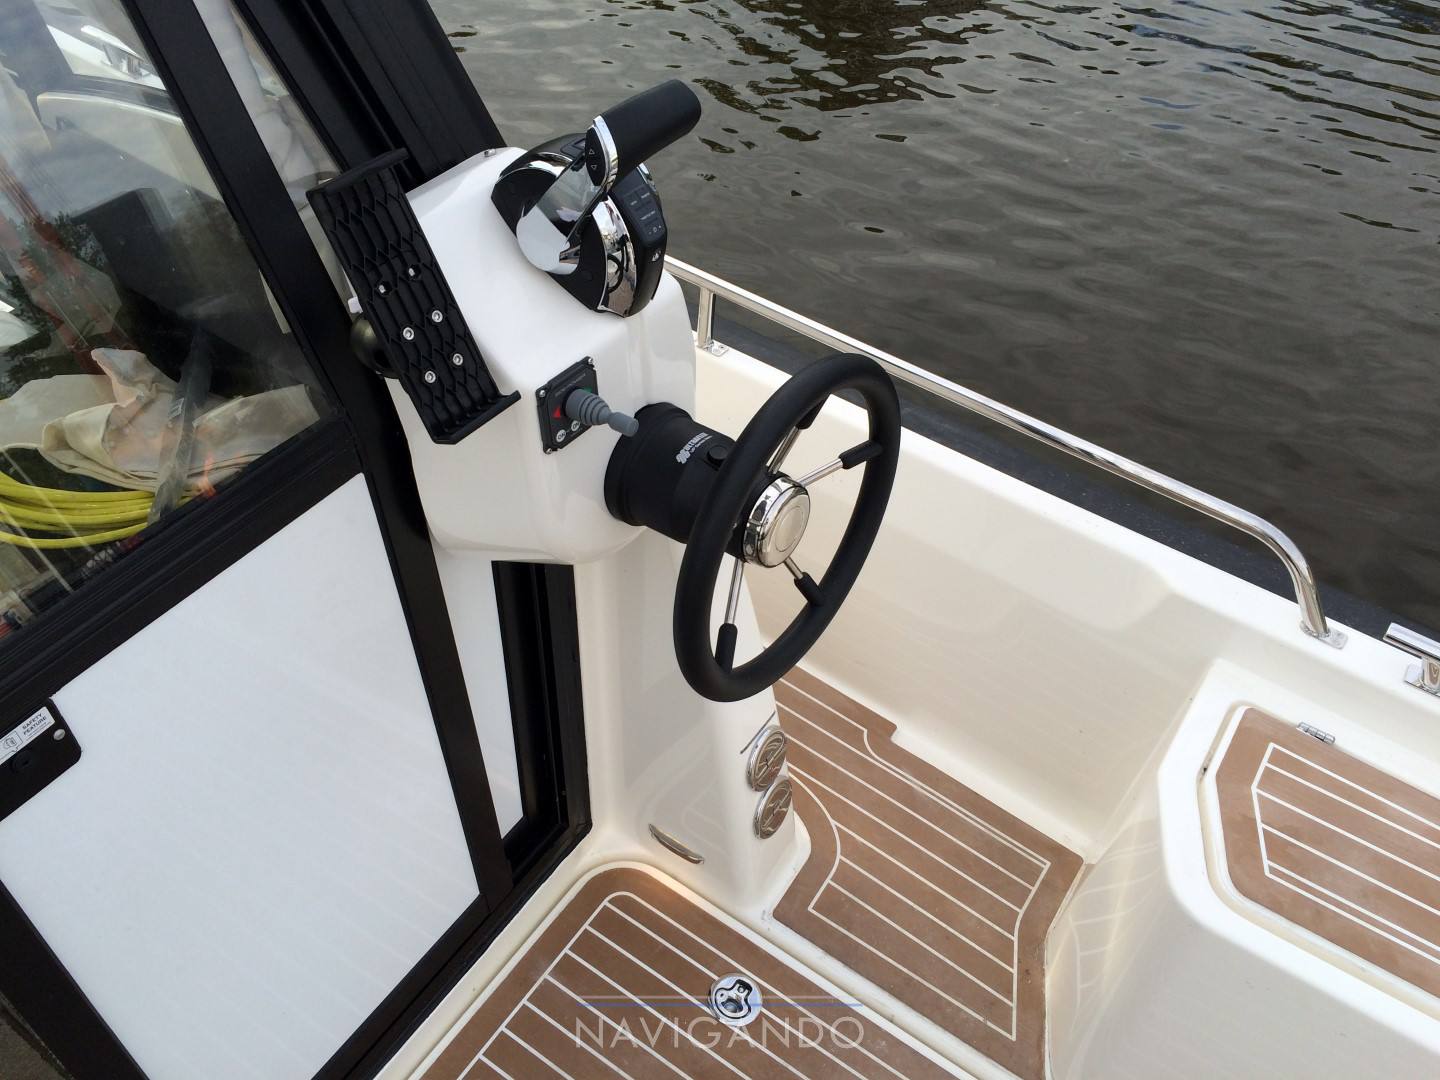 Artic Commuter 25 Motor boat new for sale